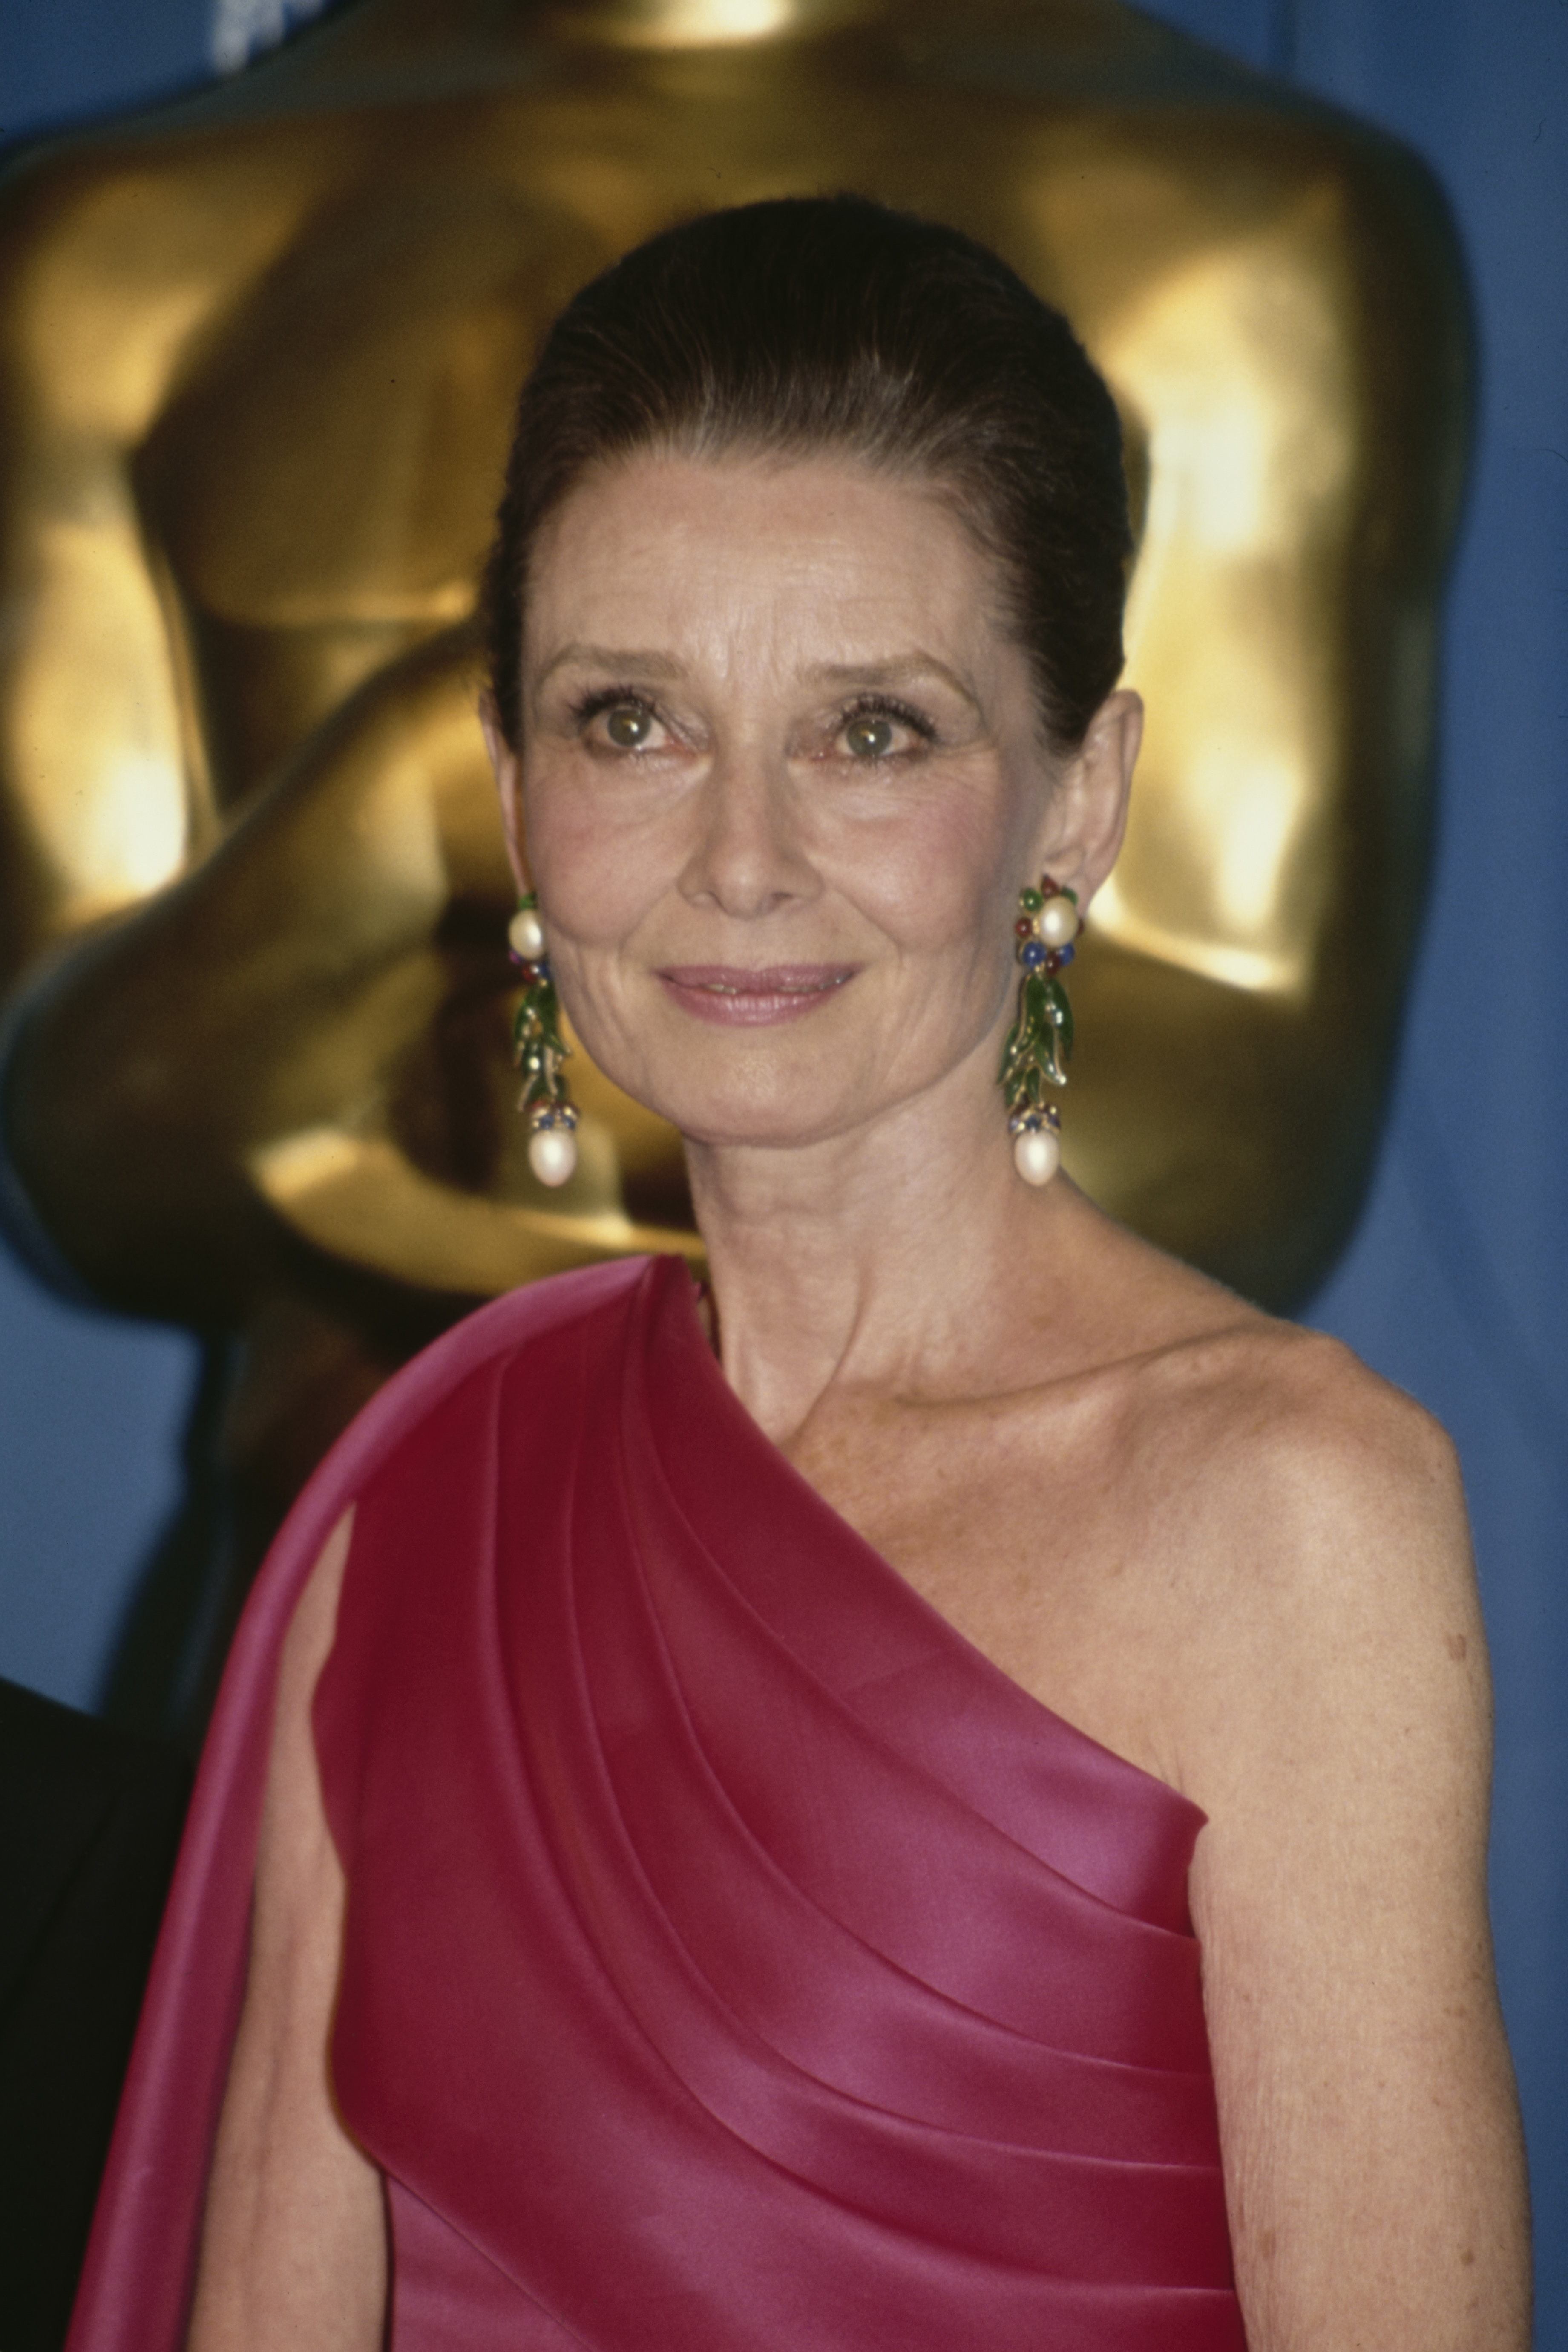 Audrey Hepburn at the 64th Academy Awards in Los Angeles, California on March 30, 1992 | Source: Getty Images